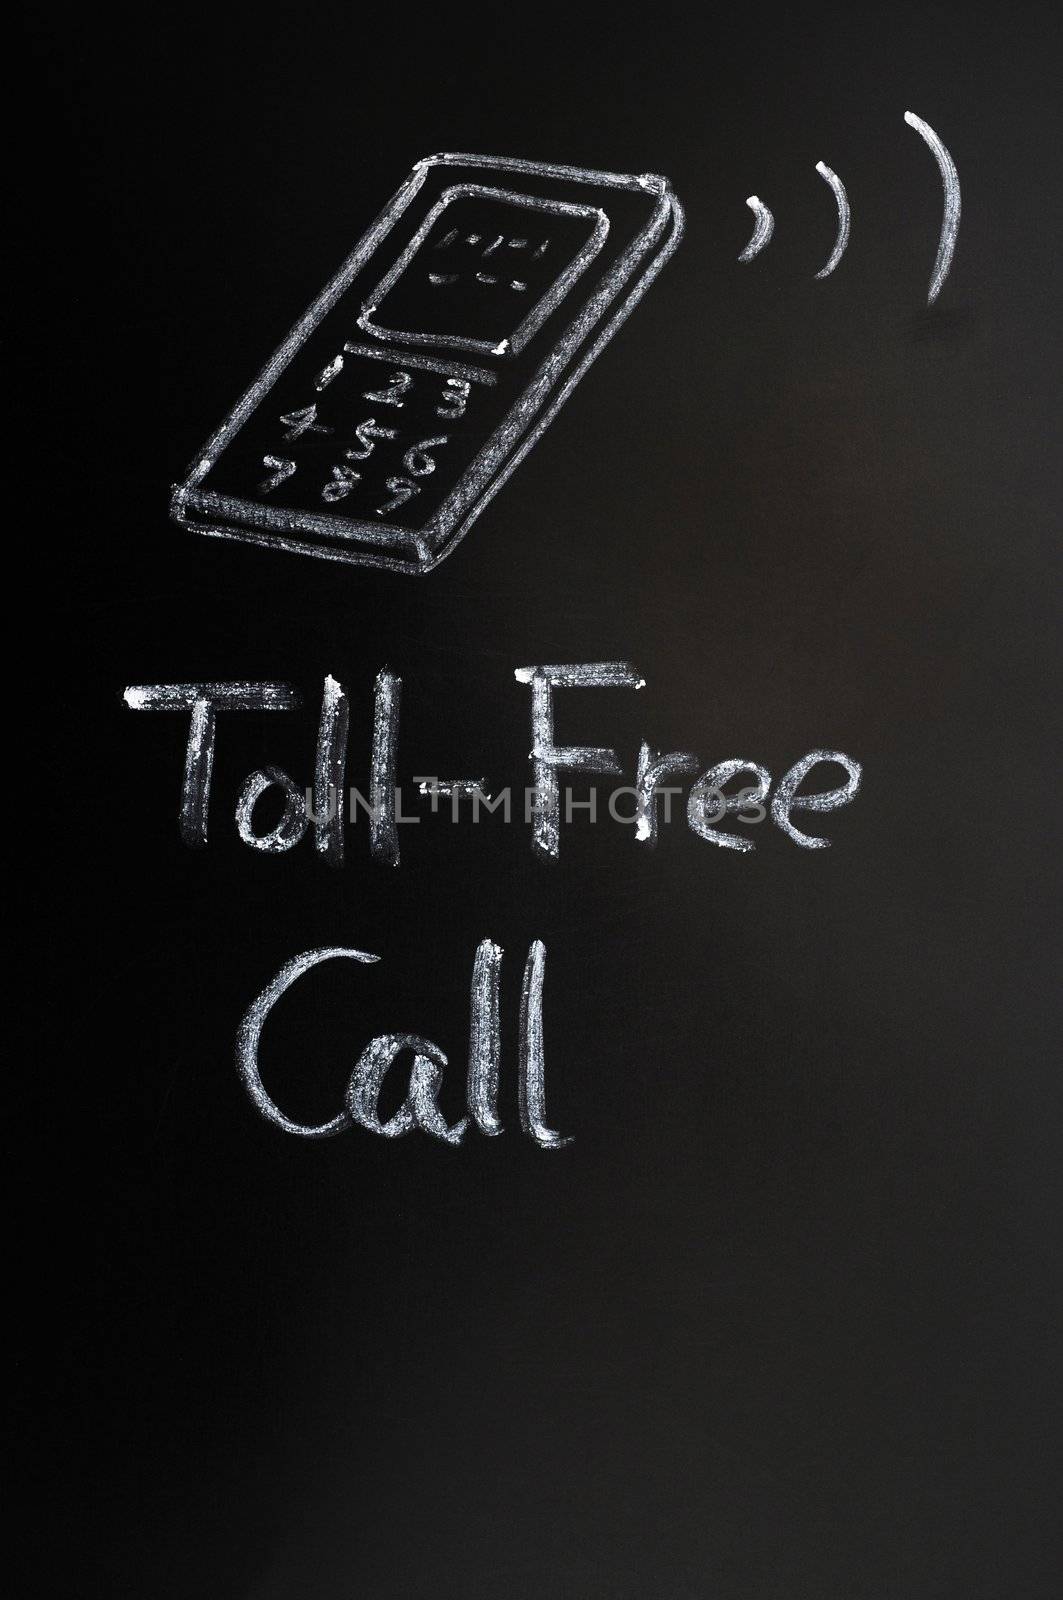 Toll-free call background by bbbar